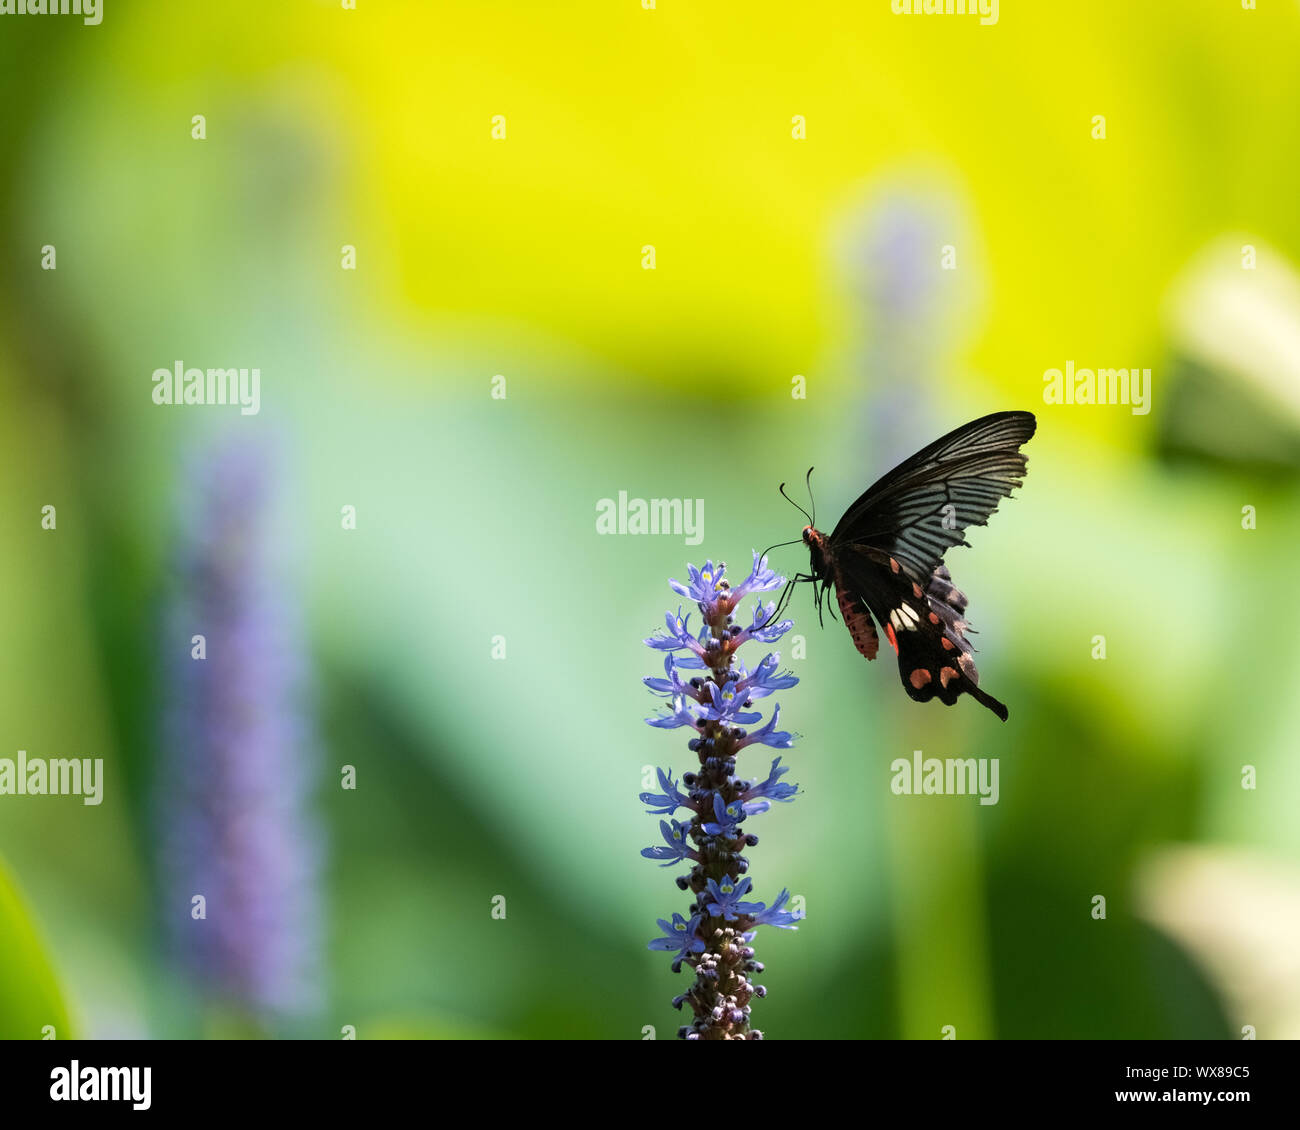 Black swallowtail butterfly on flower Banque D'Images